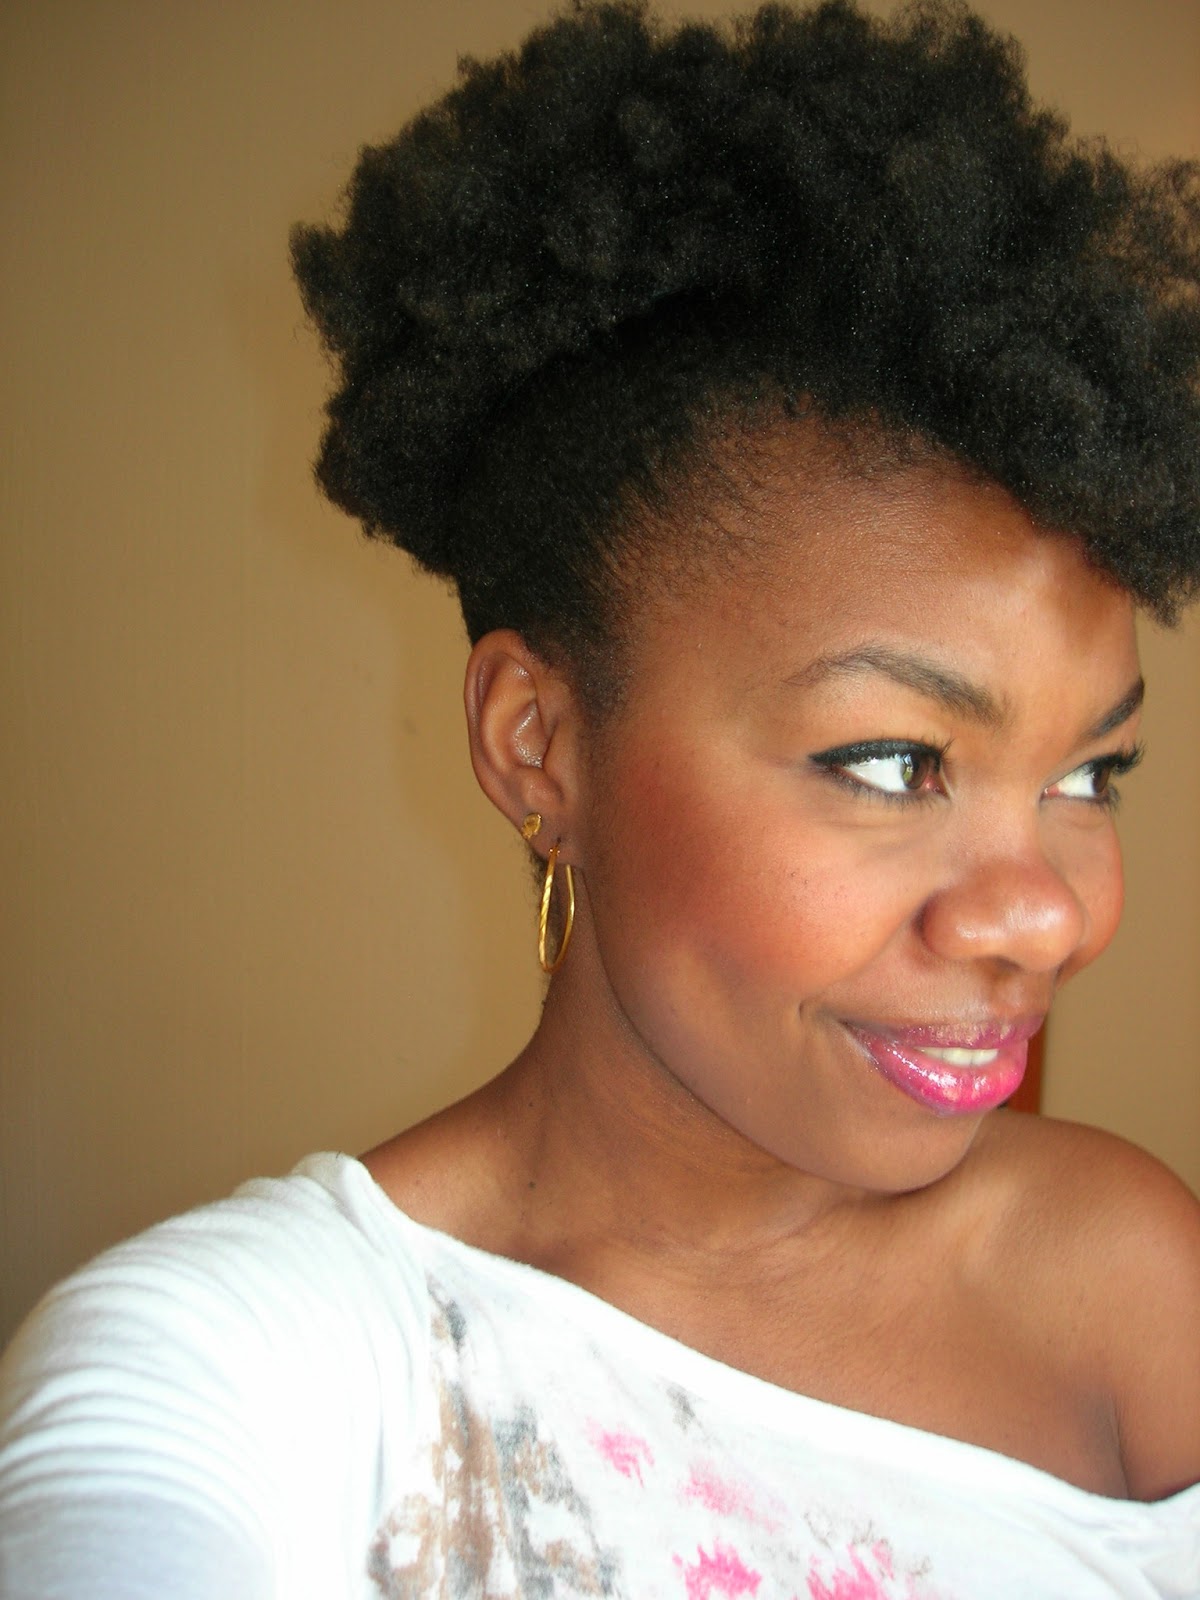 5 Things to think about when switching to natural hair | Bona Magazine